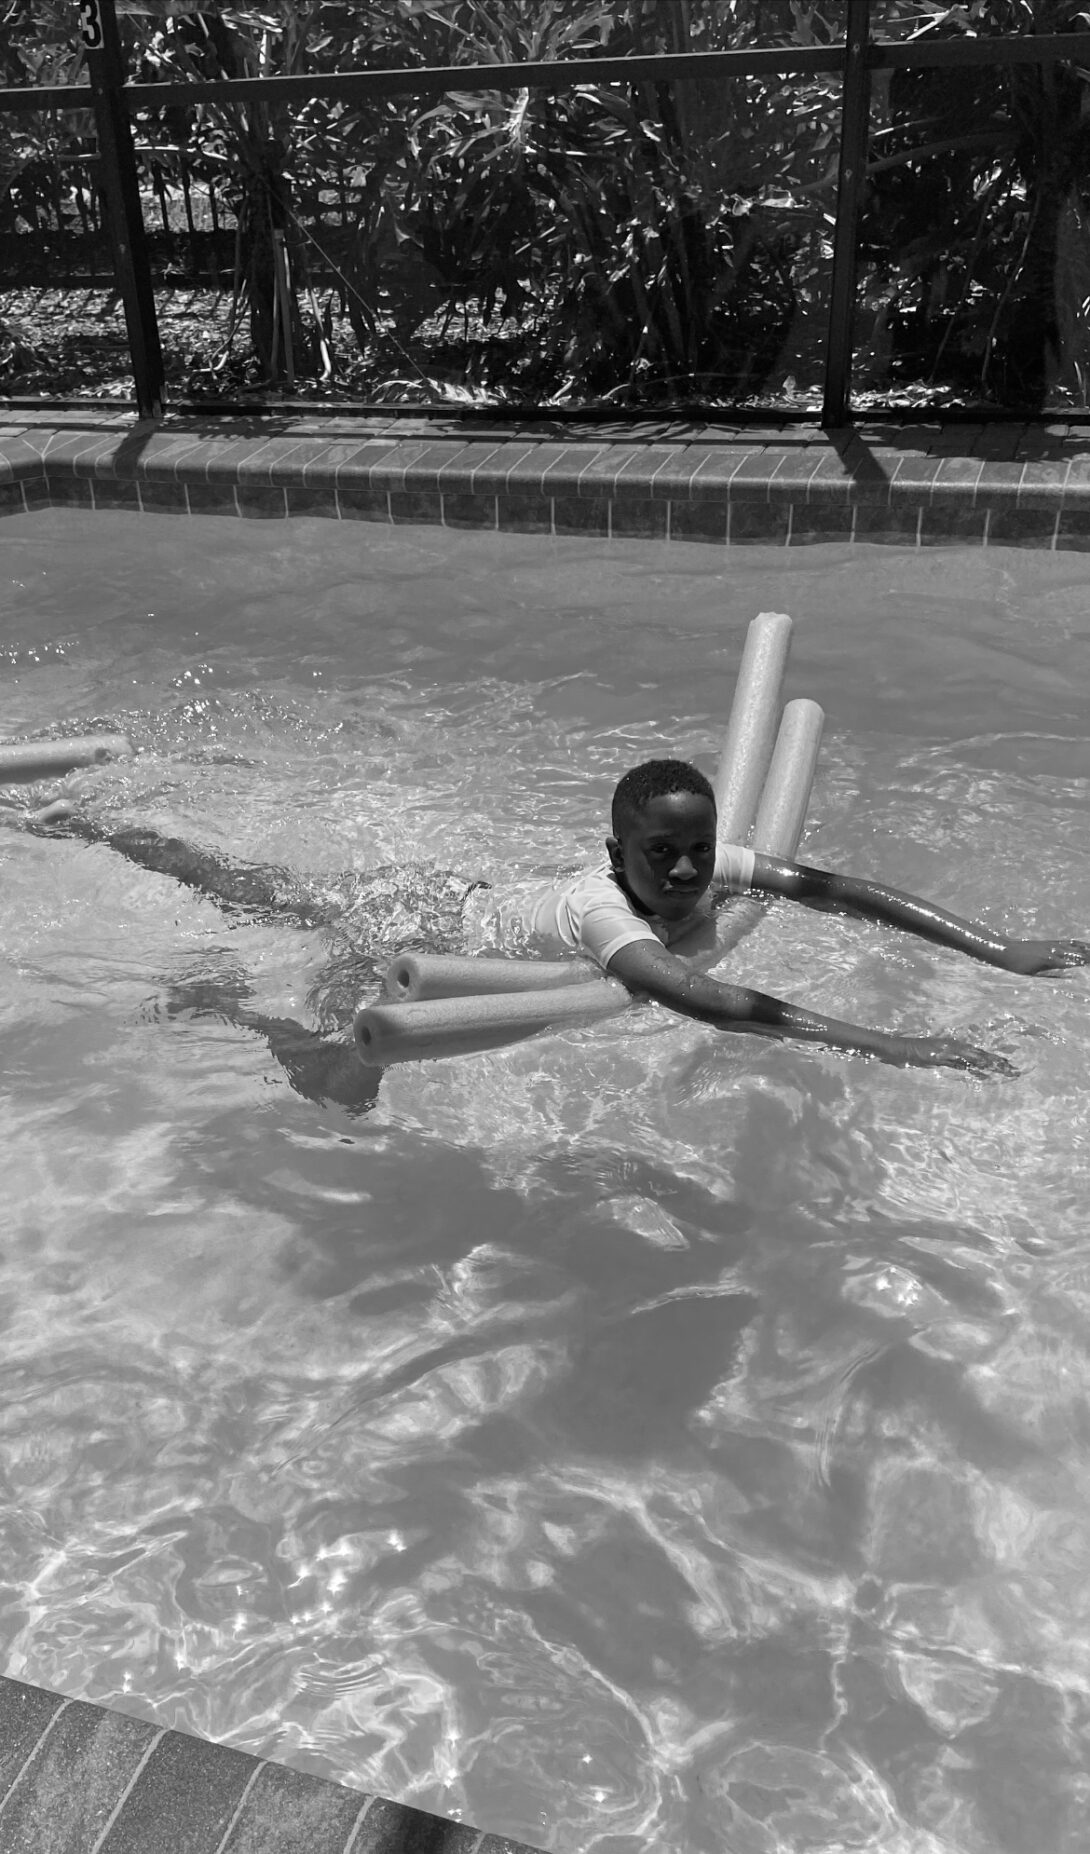 A young boy swims in a pool using pool noodles